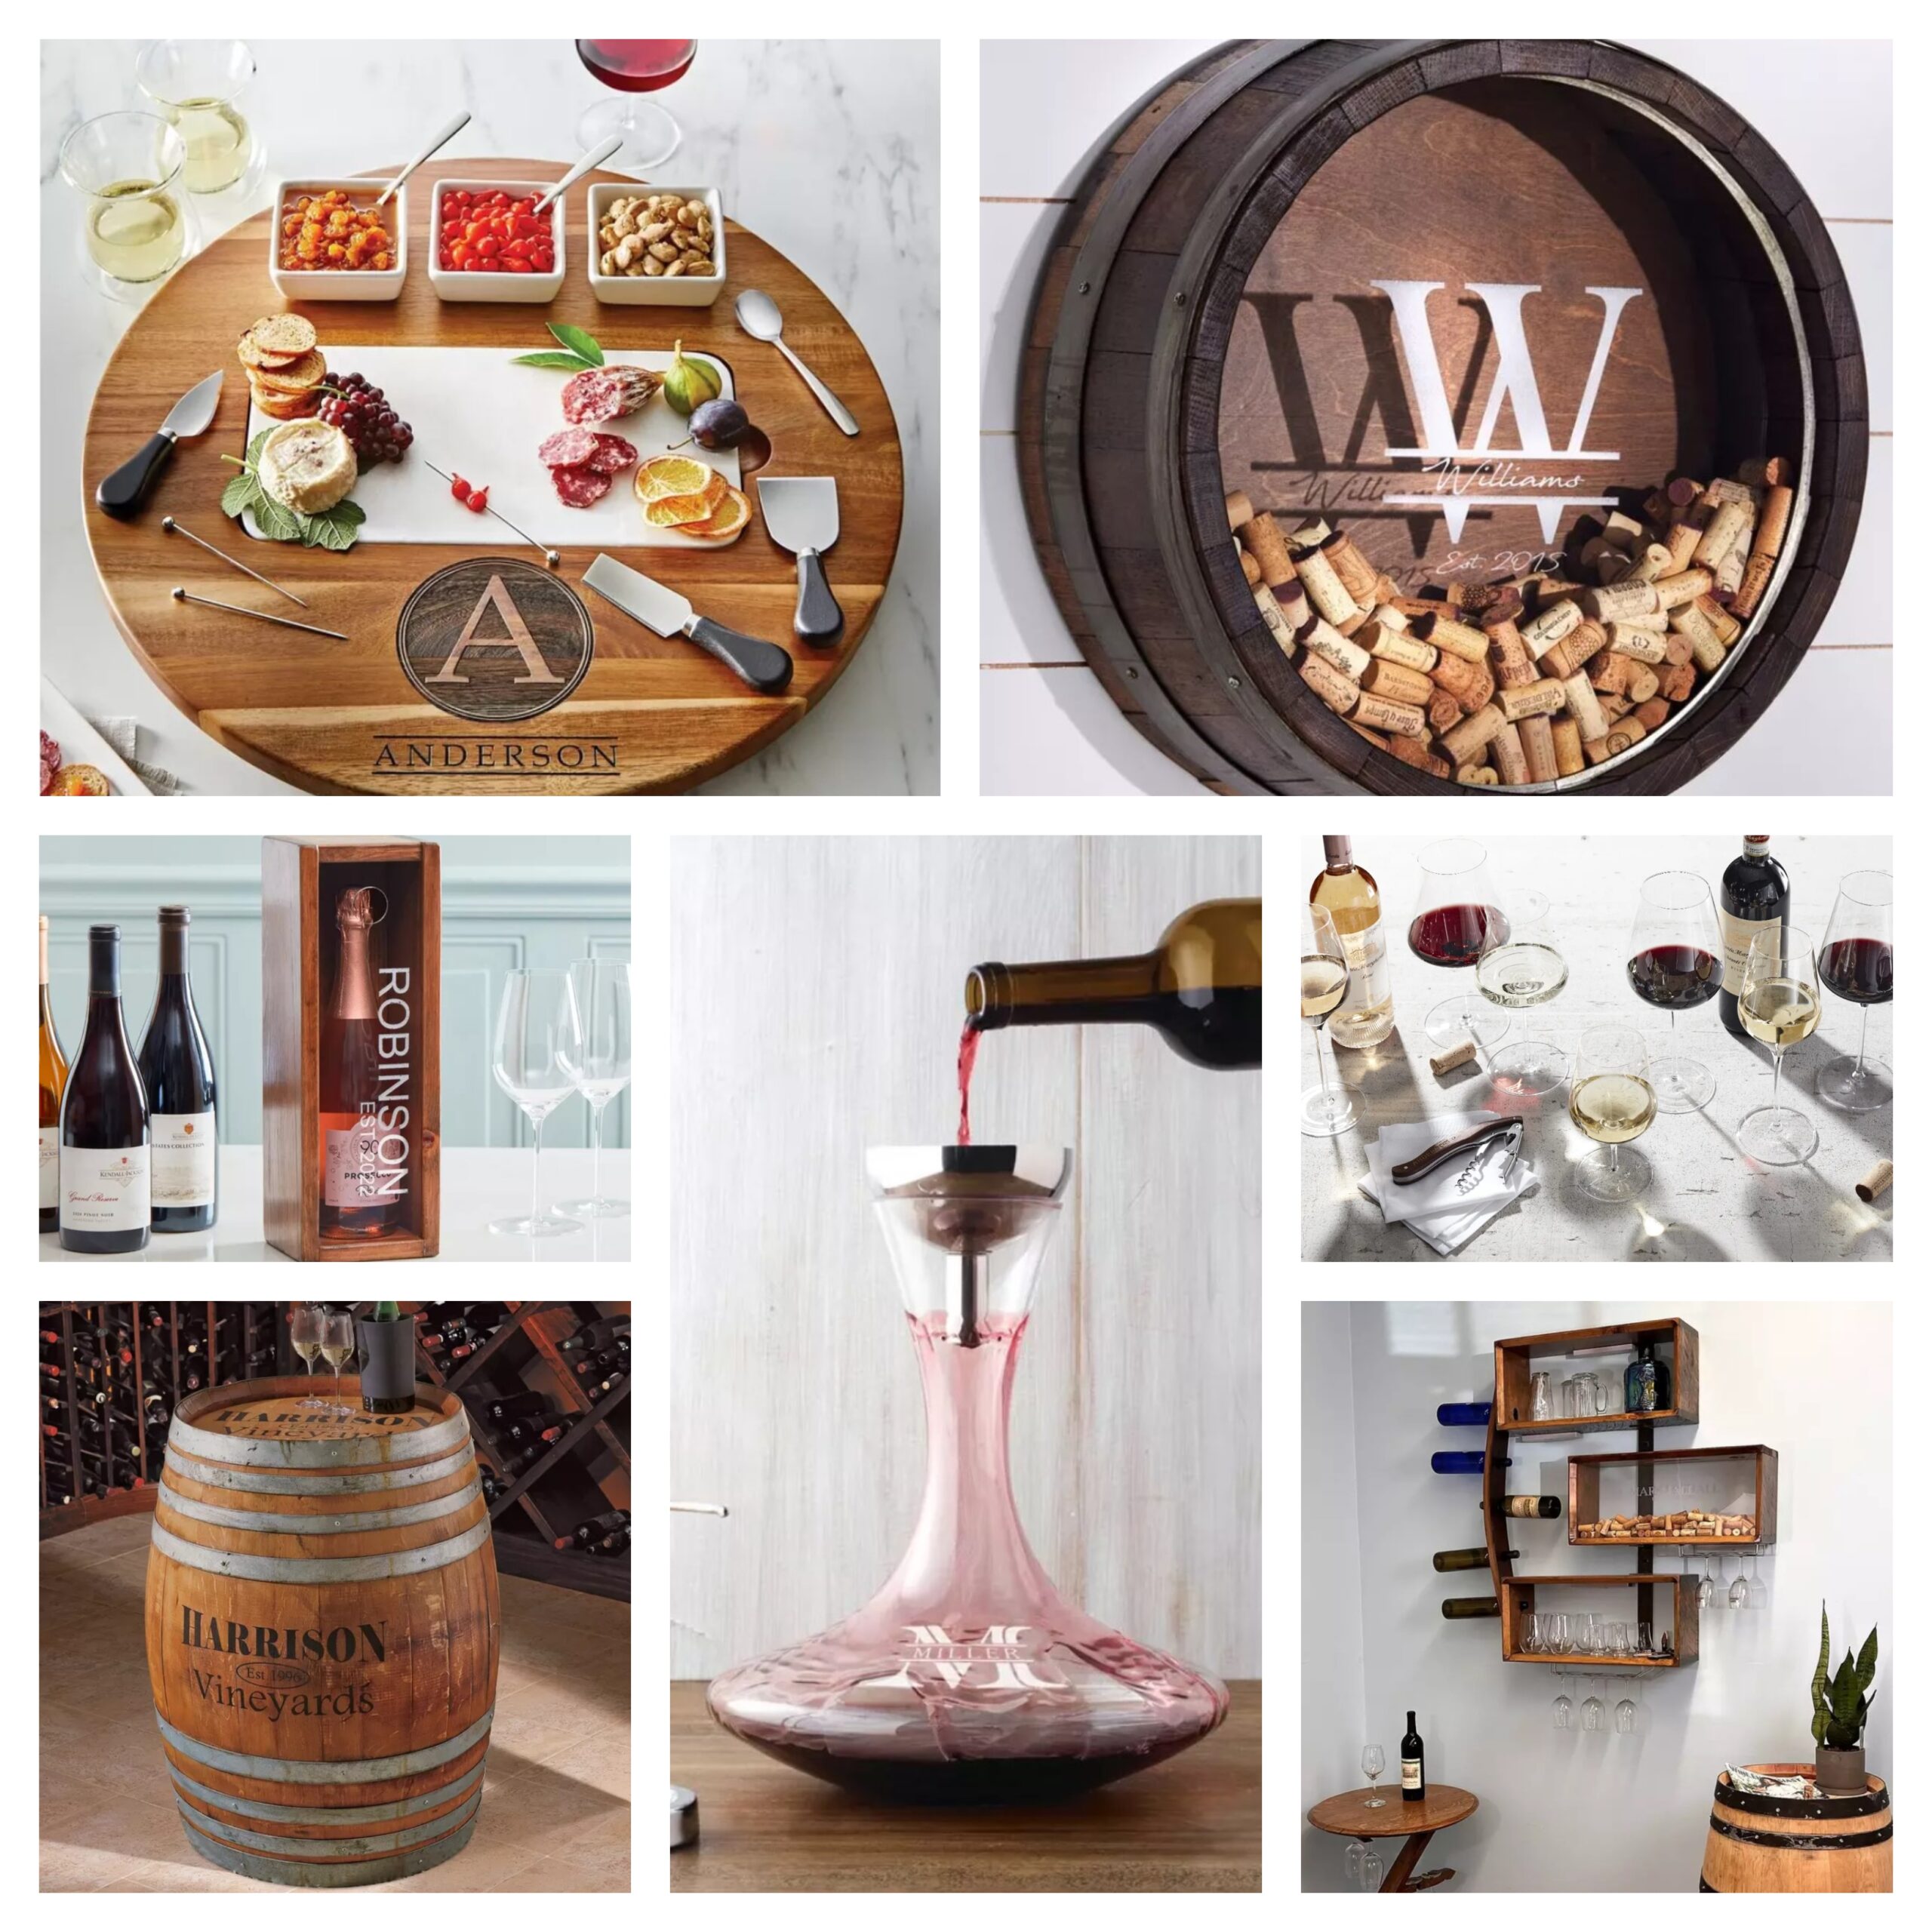 10 Inexpensive Gifts for Wine Lovers | Gifts for wine lovers, Wine lovers,  Wine club gift